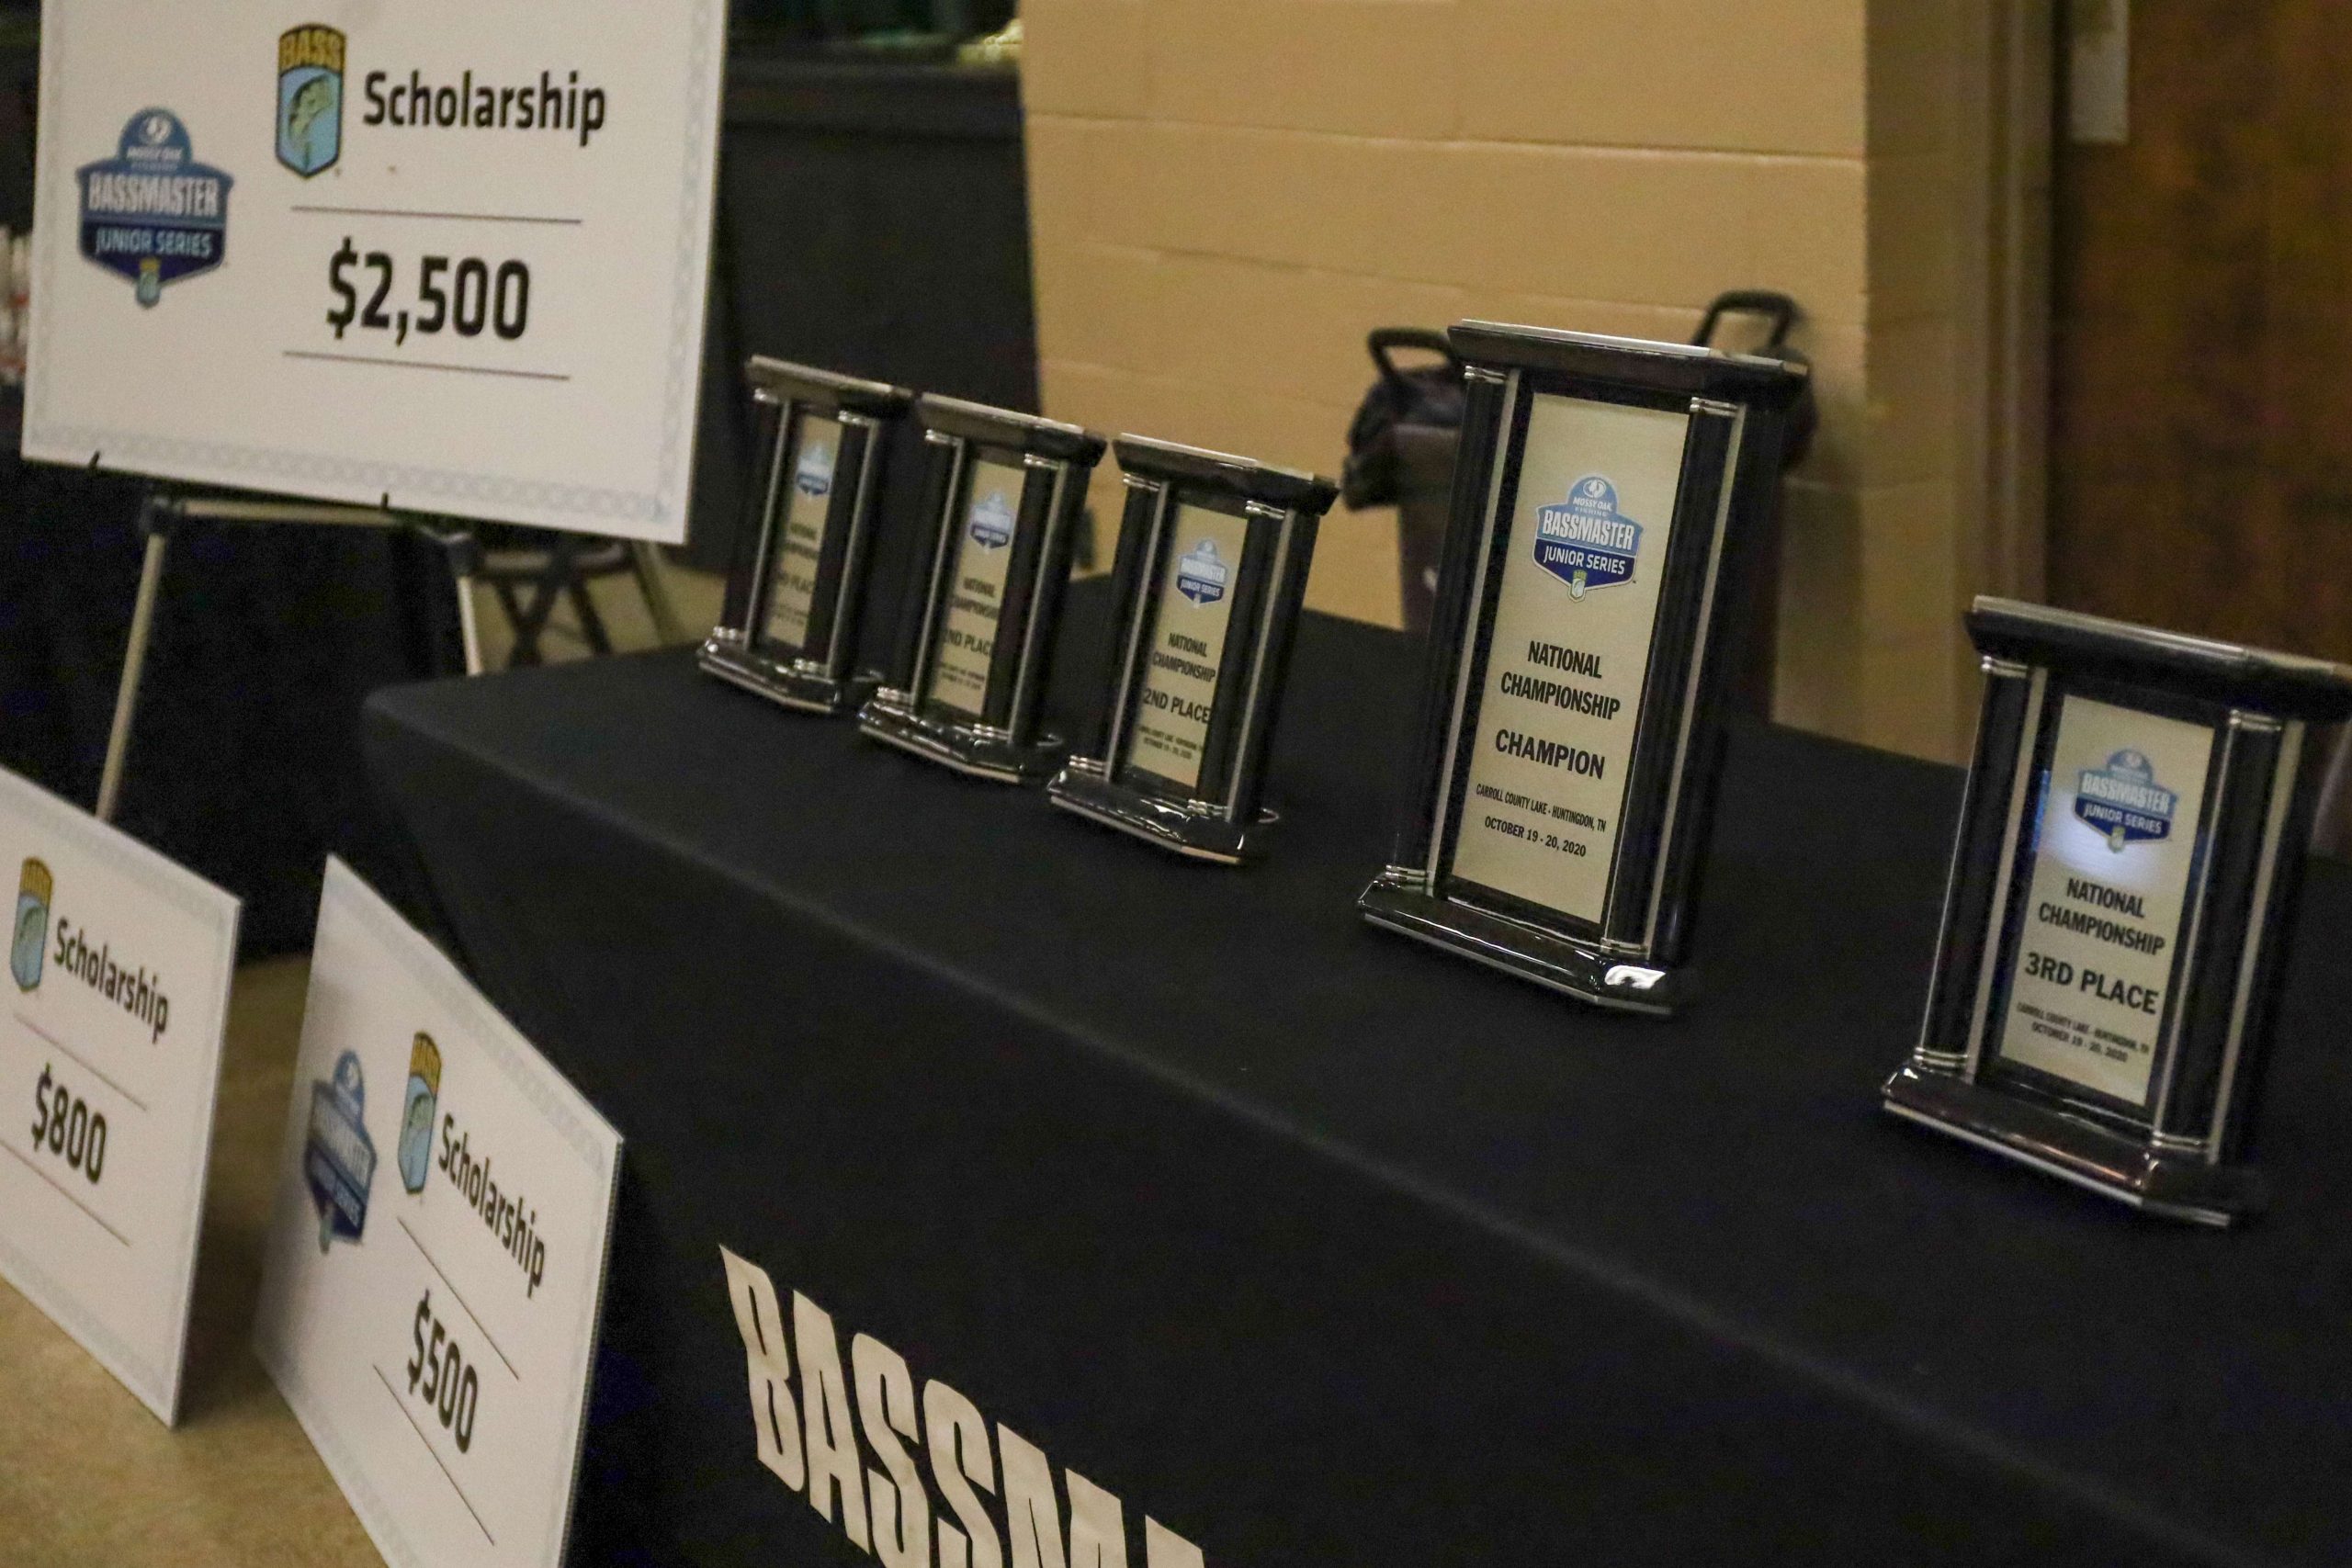 All the shiny hardware is set up for the anglers to see what is up for grabs at the Junior Champ!